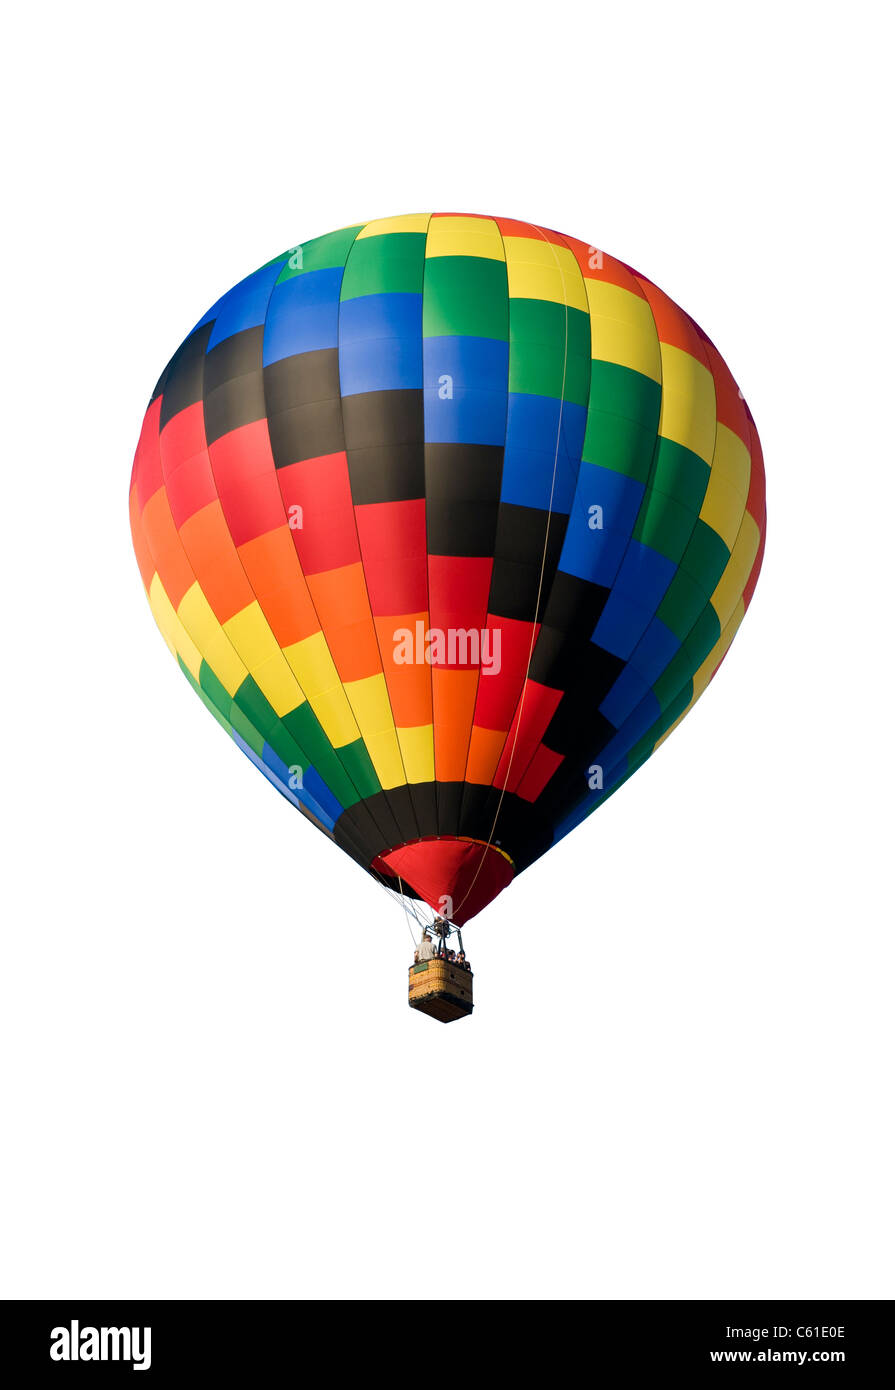 Colorful hot-air balloon floating against a white background Stock Photo